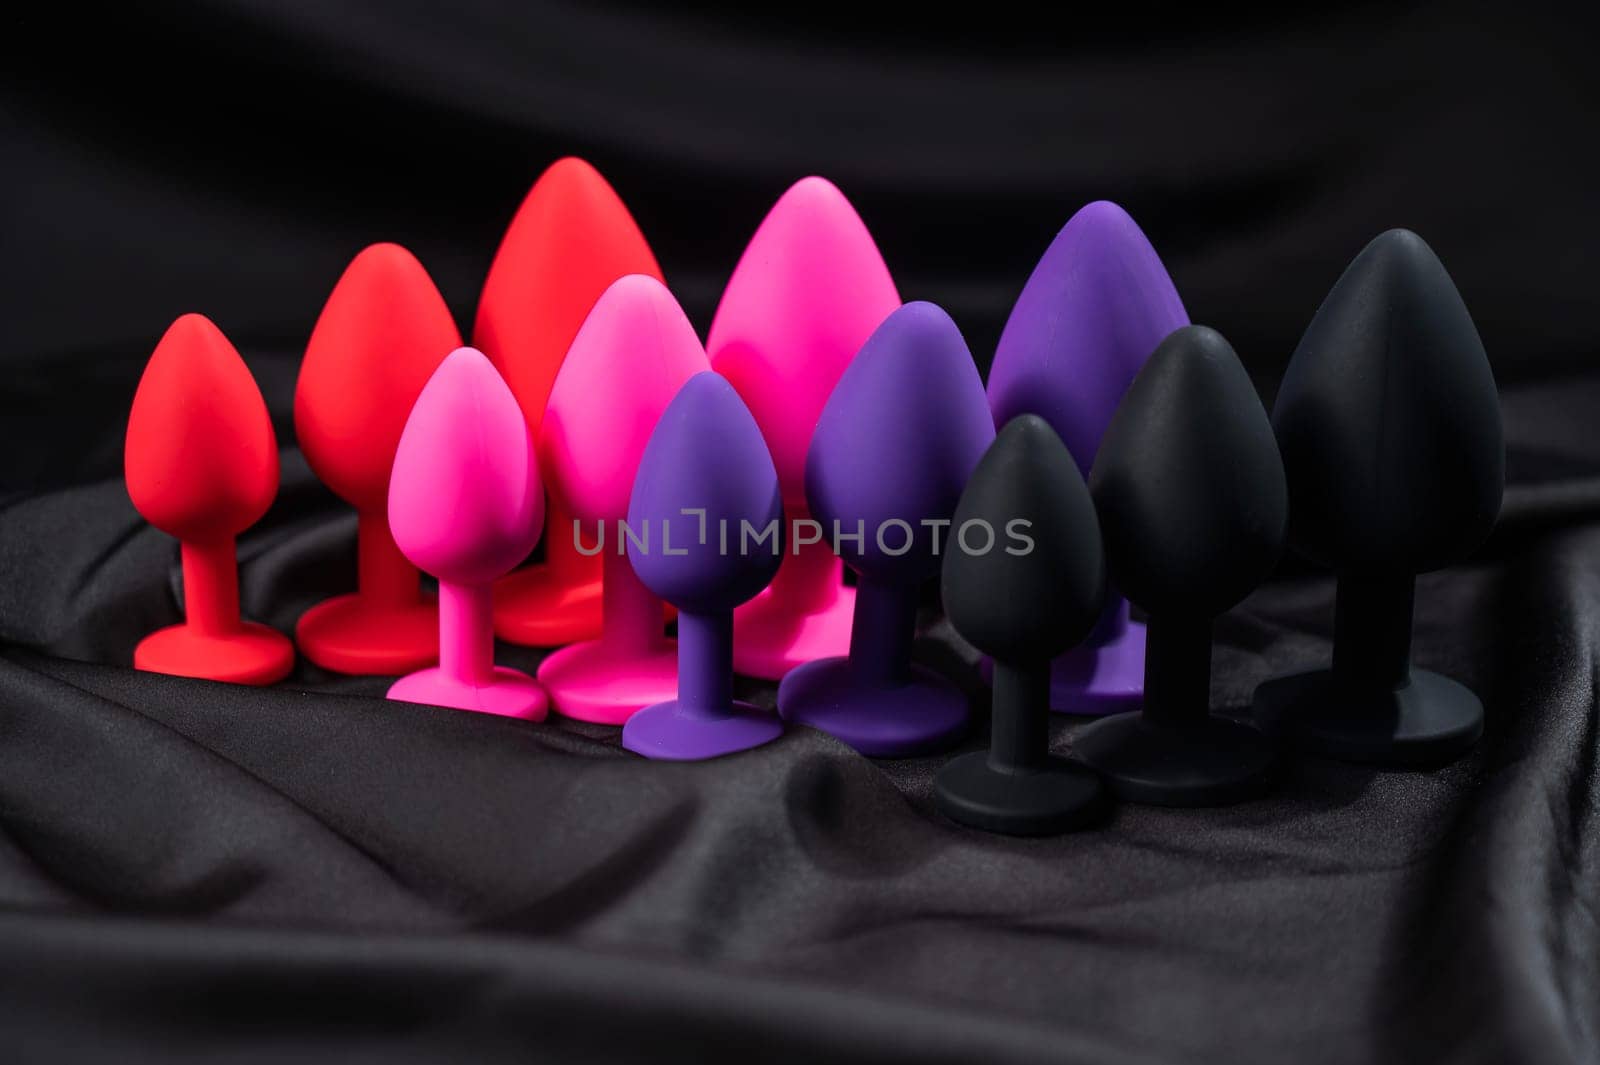 A set of silicone anal plugs in different colors and sizes on a black silk sheet